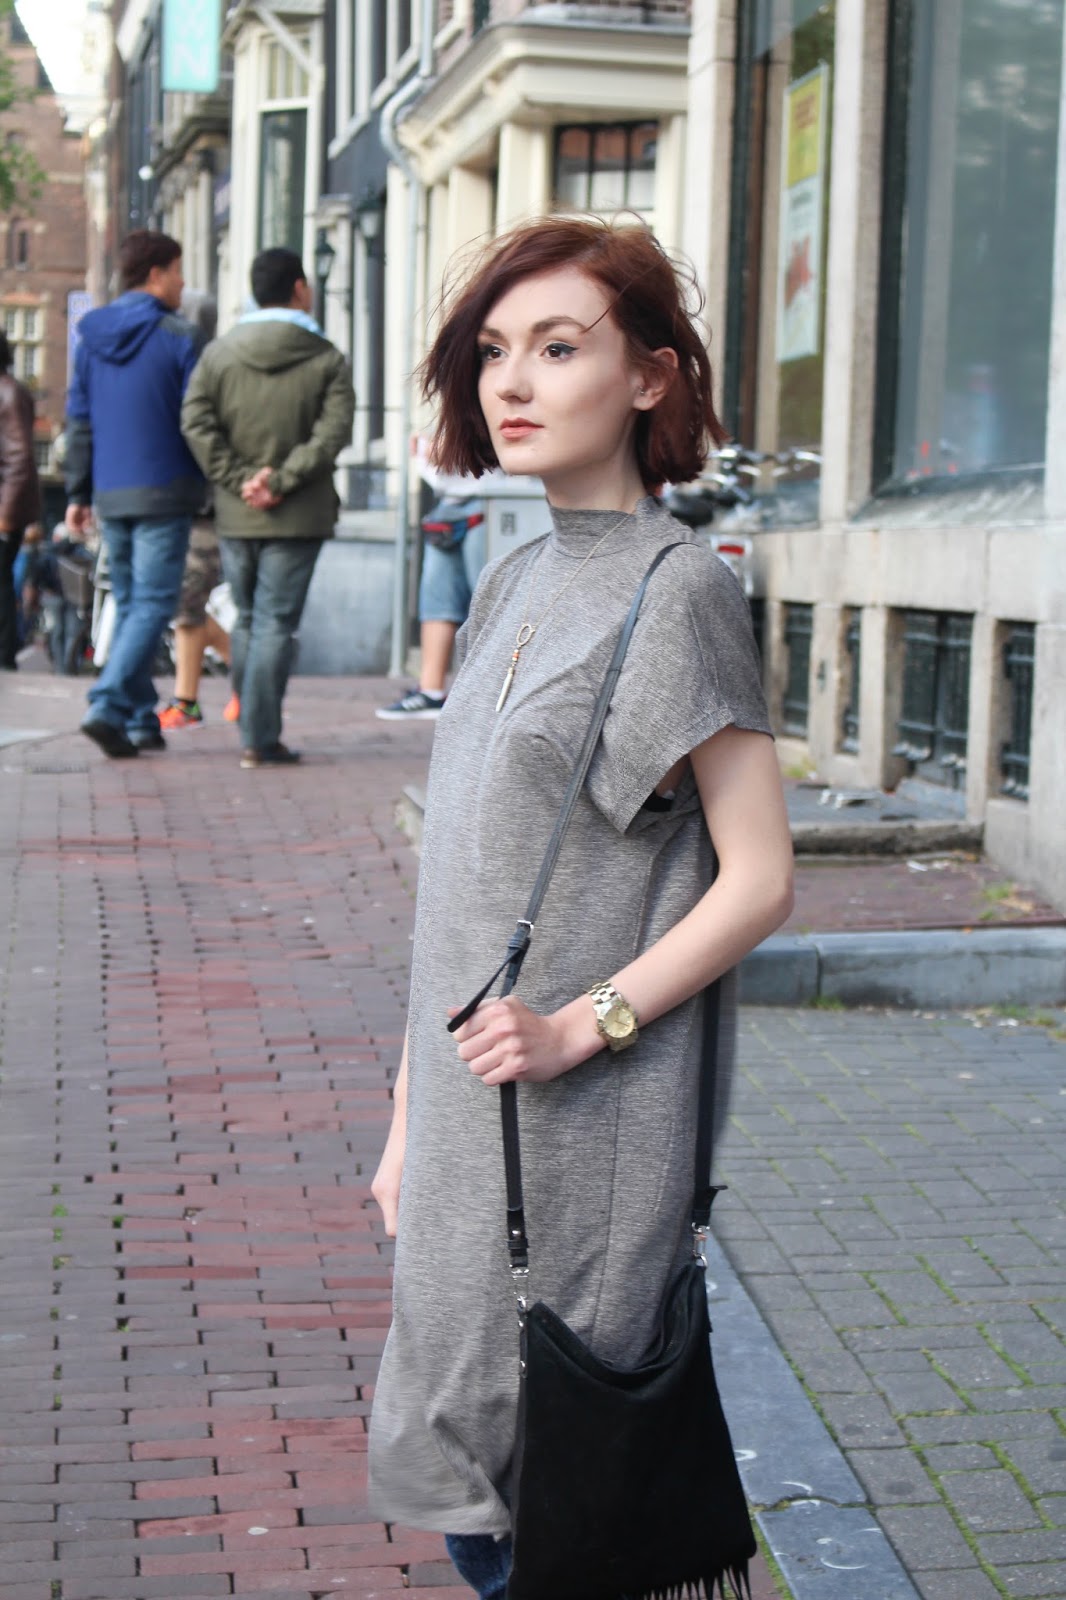 Amsterdam Outfit 1: The Dress and Jeans | Salt and Chic